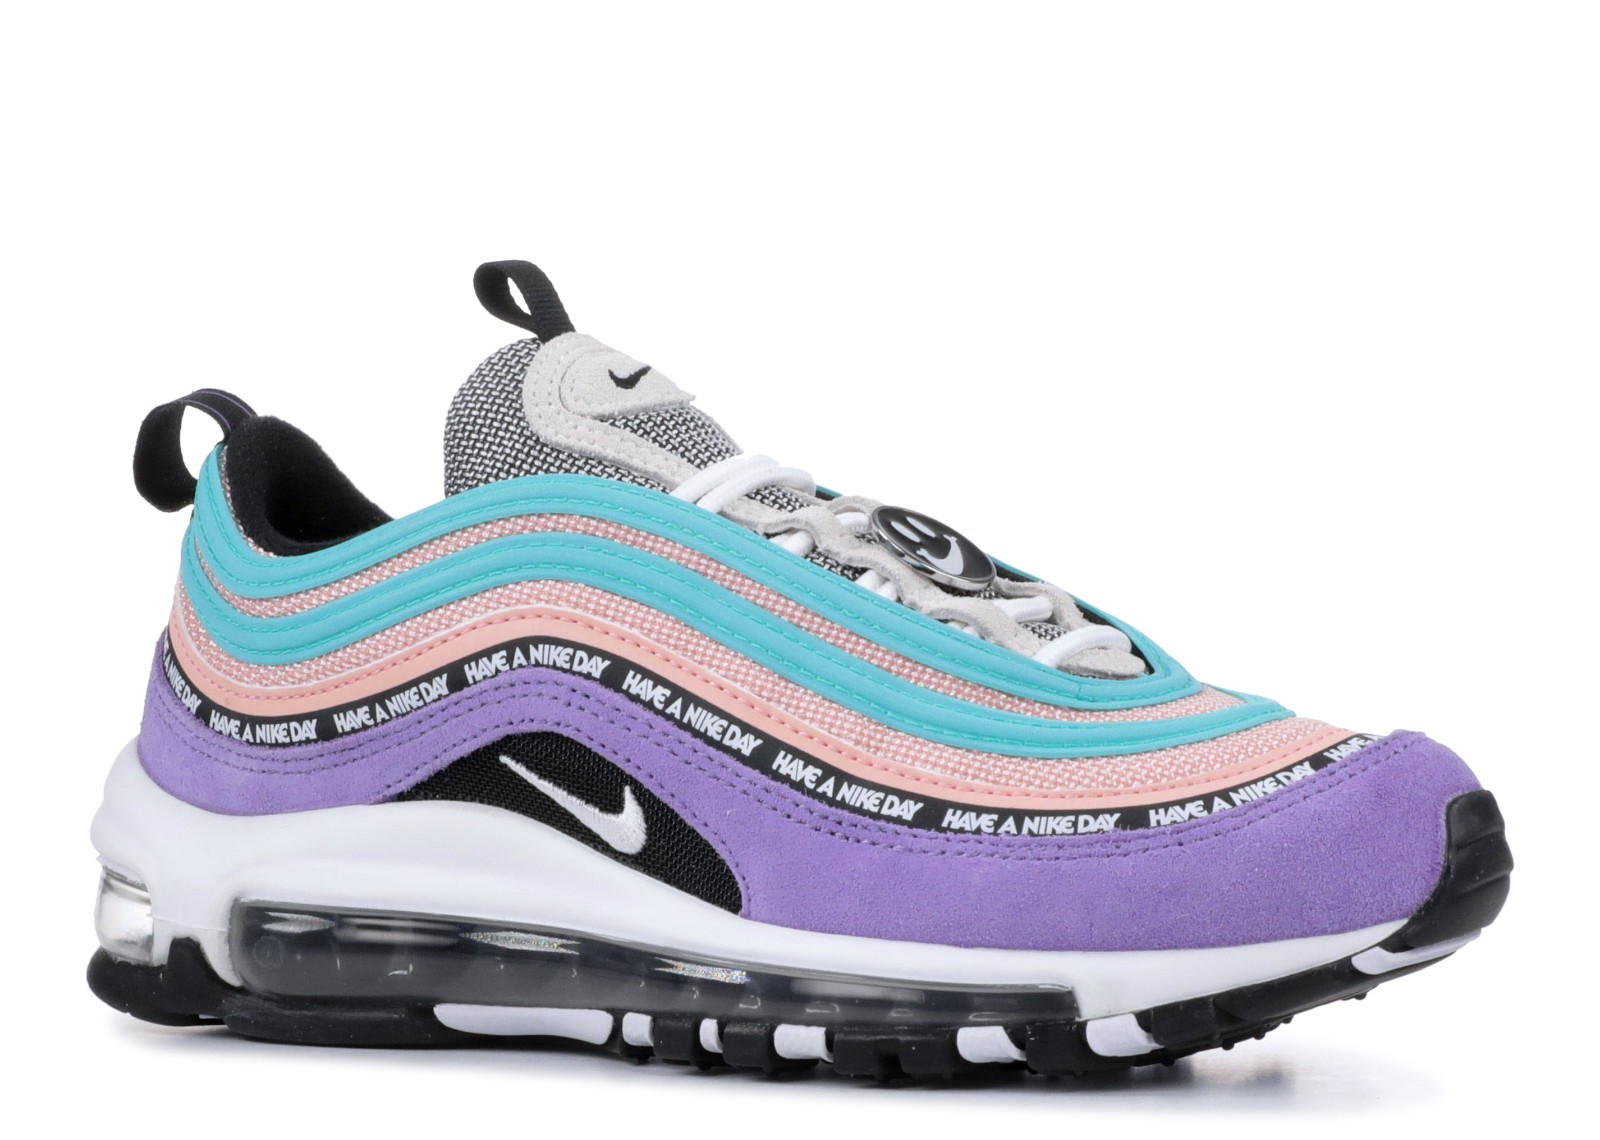 Nike Air Max 97 Have a Nike Day Space Purple White Black 923288-500 ...